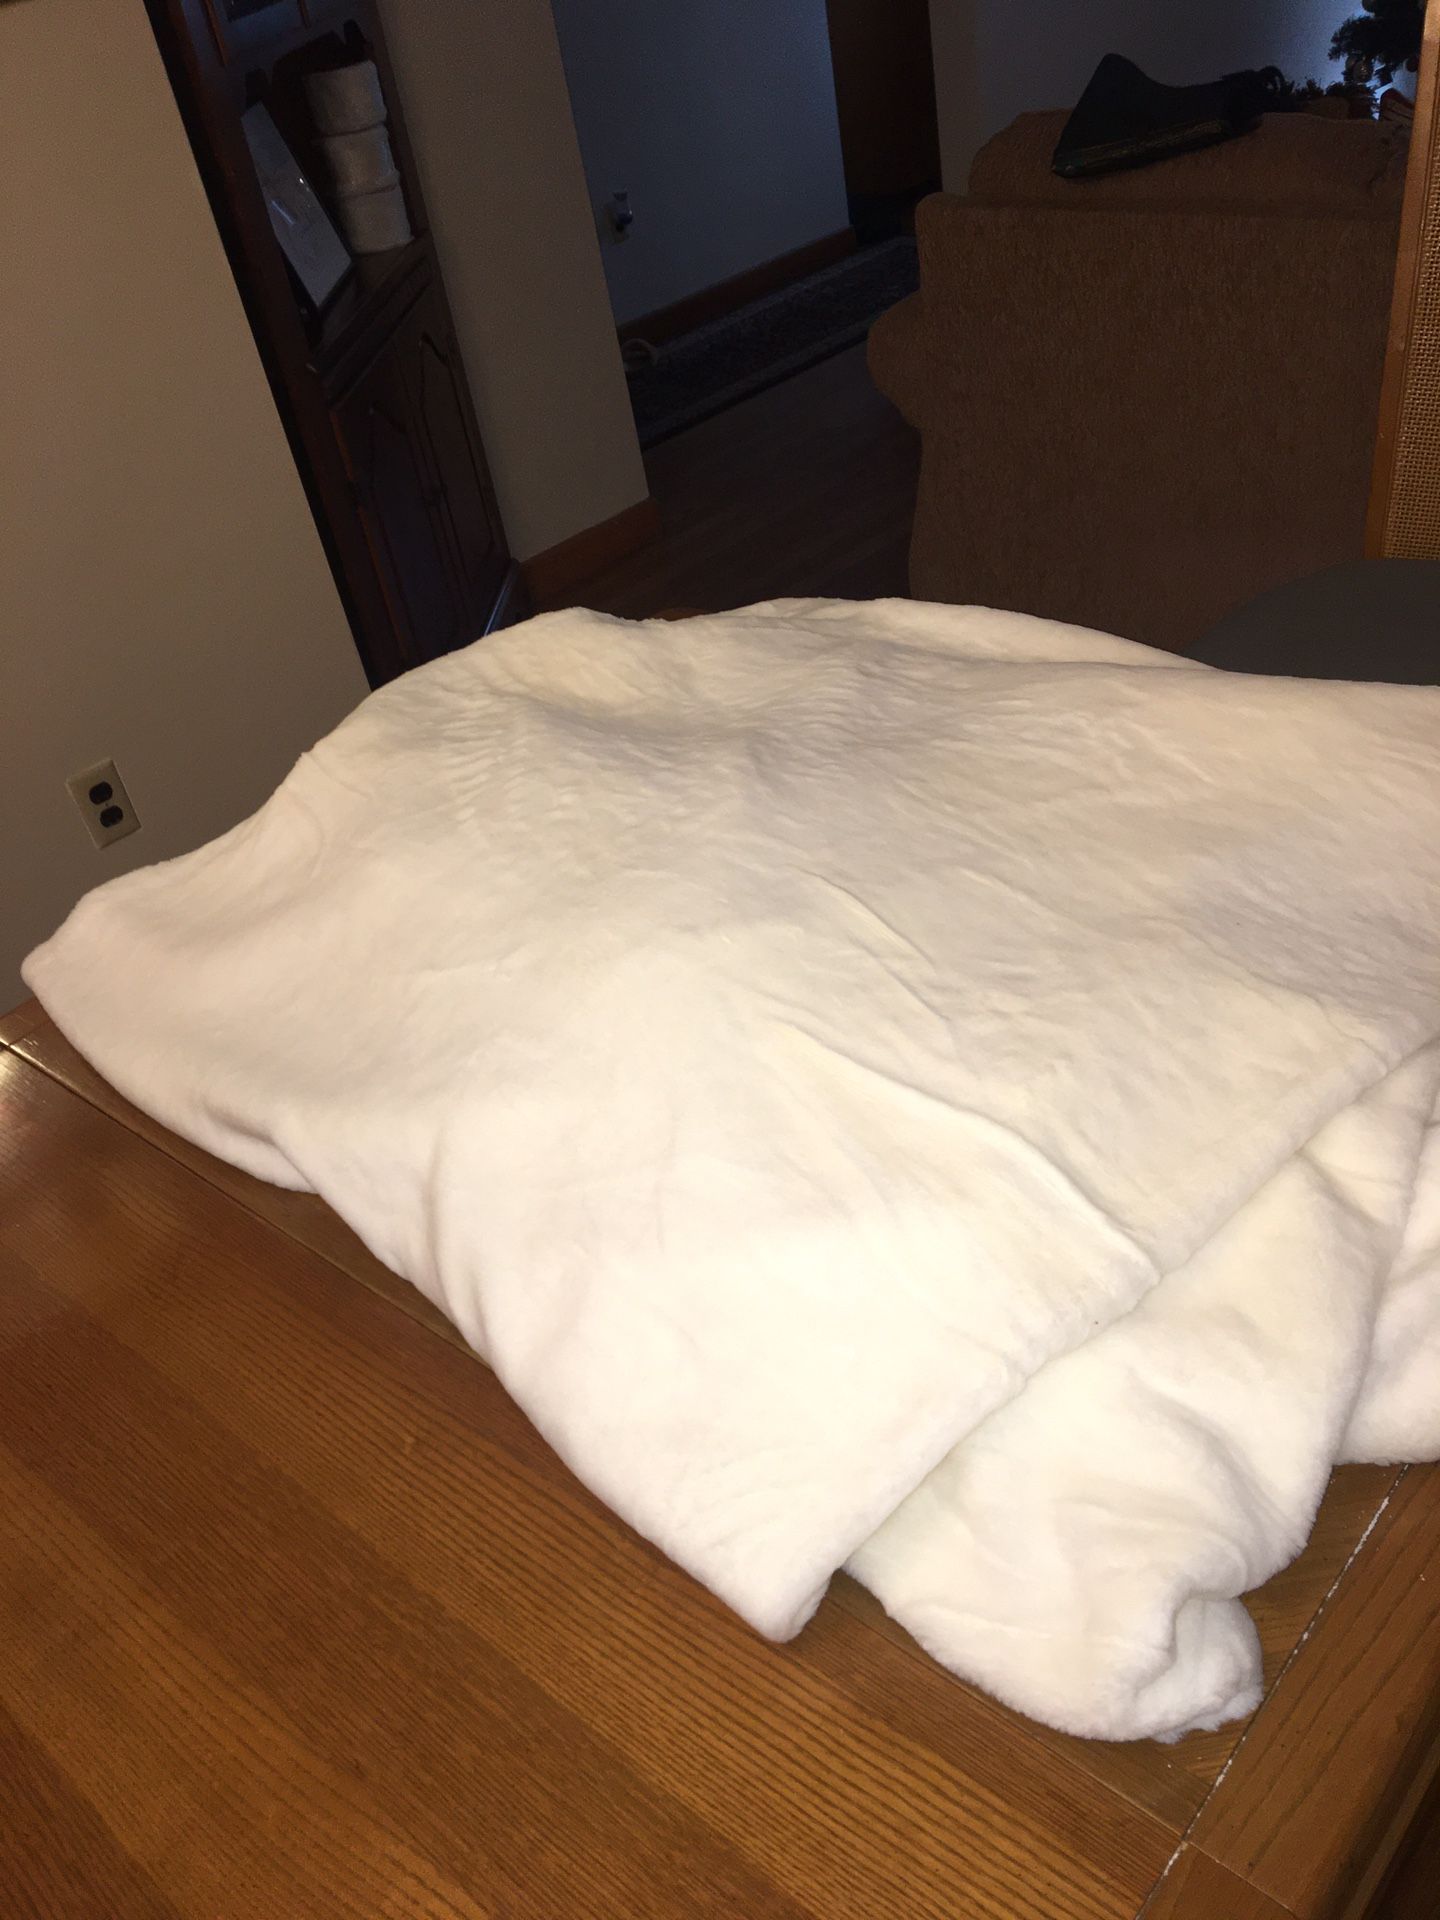 6 yards of white faux fur fabric $60